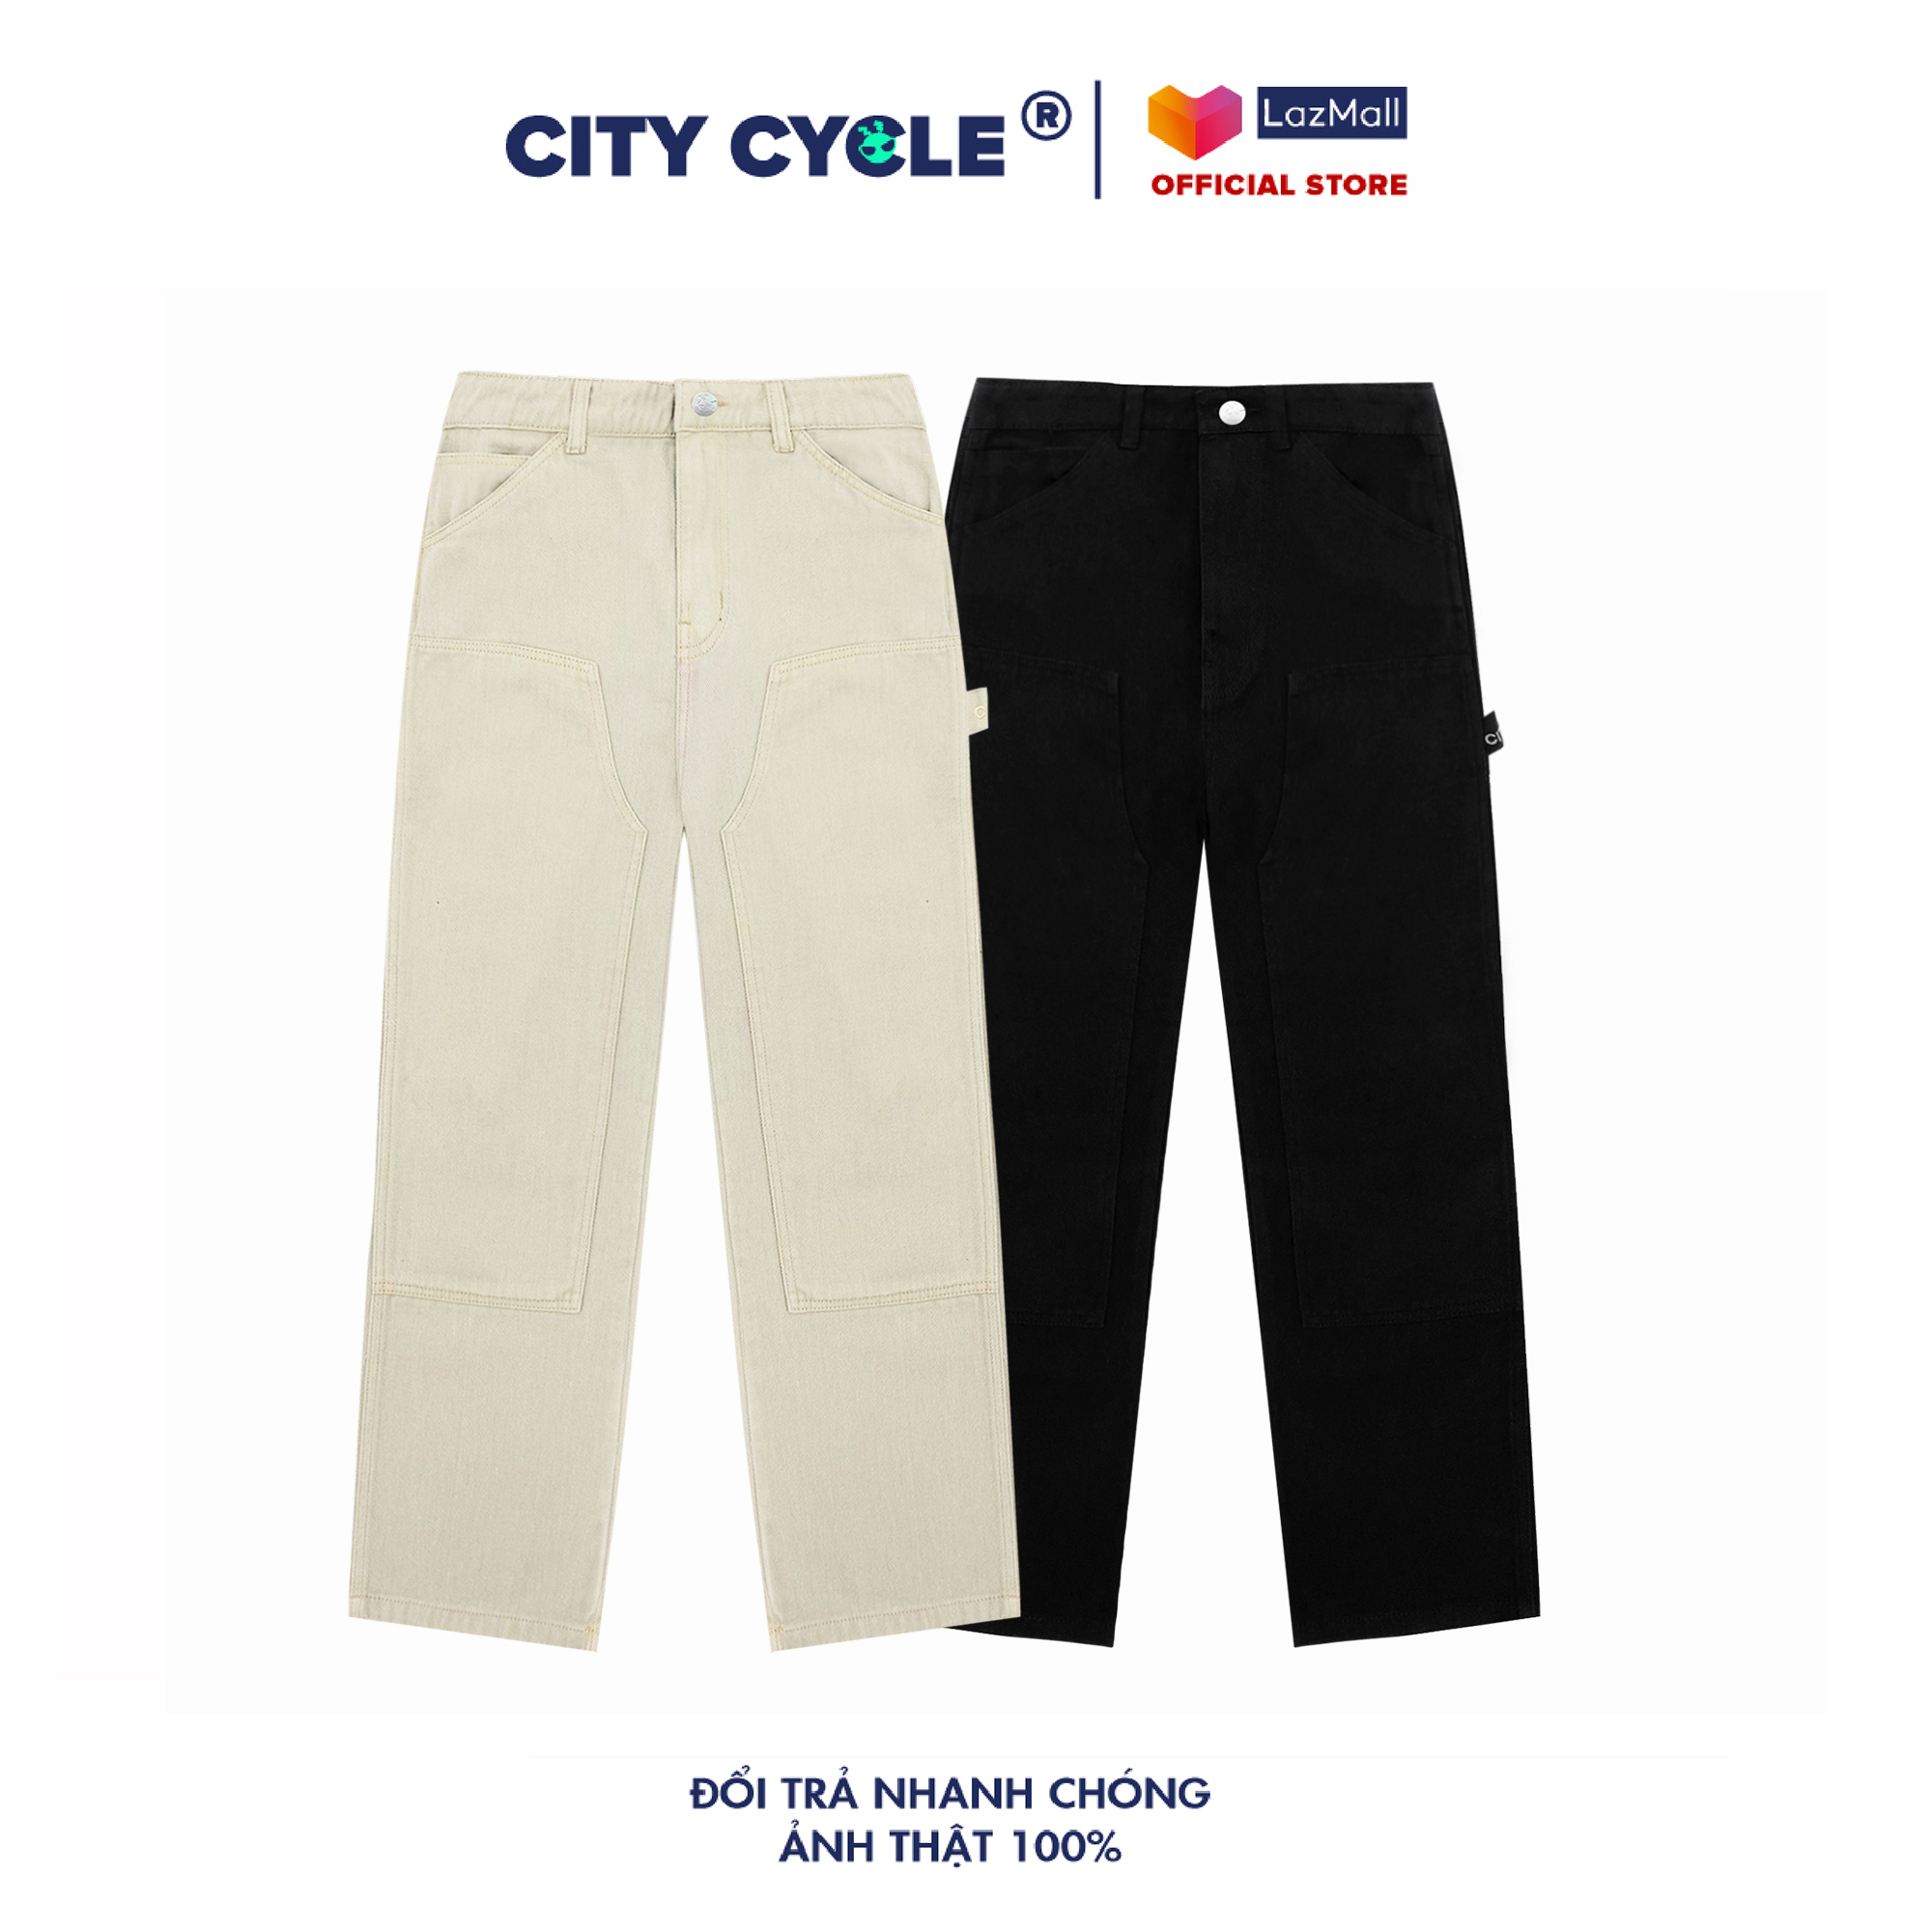 Quần Jean Local Brand Double Knee City Cycle unisex form rộng nam nữ